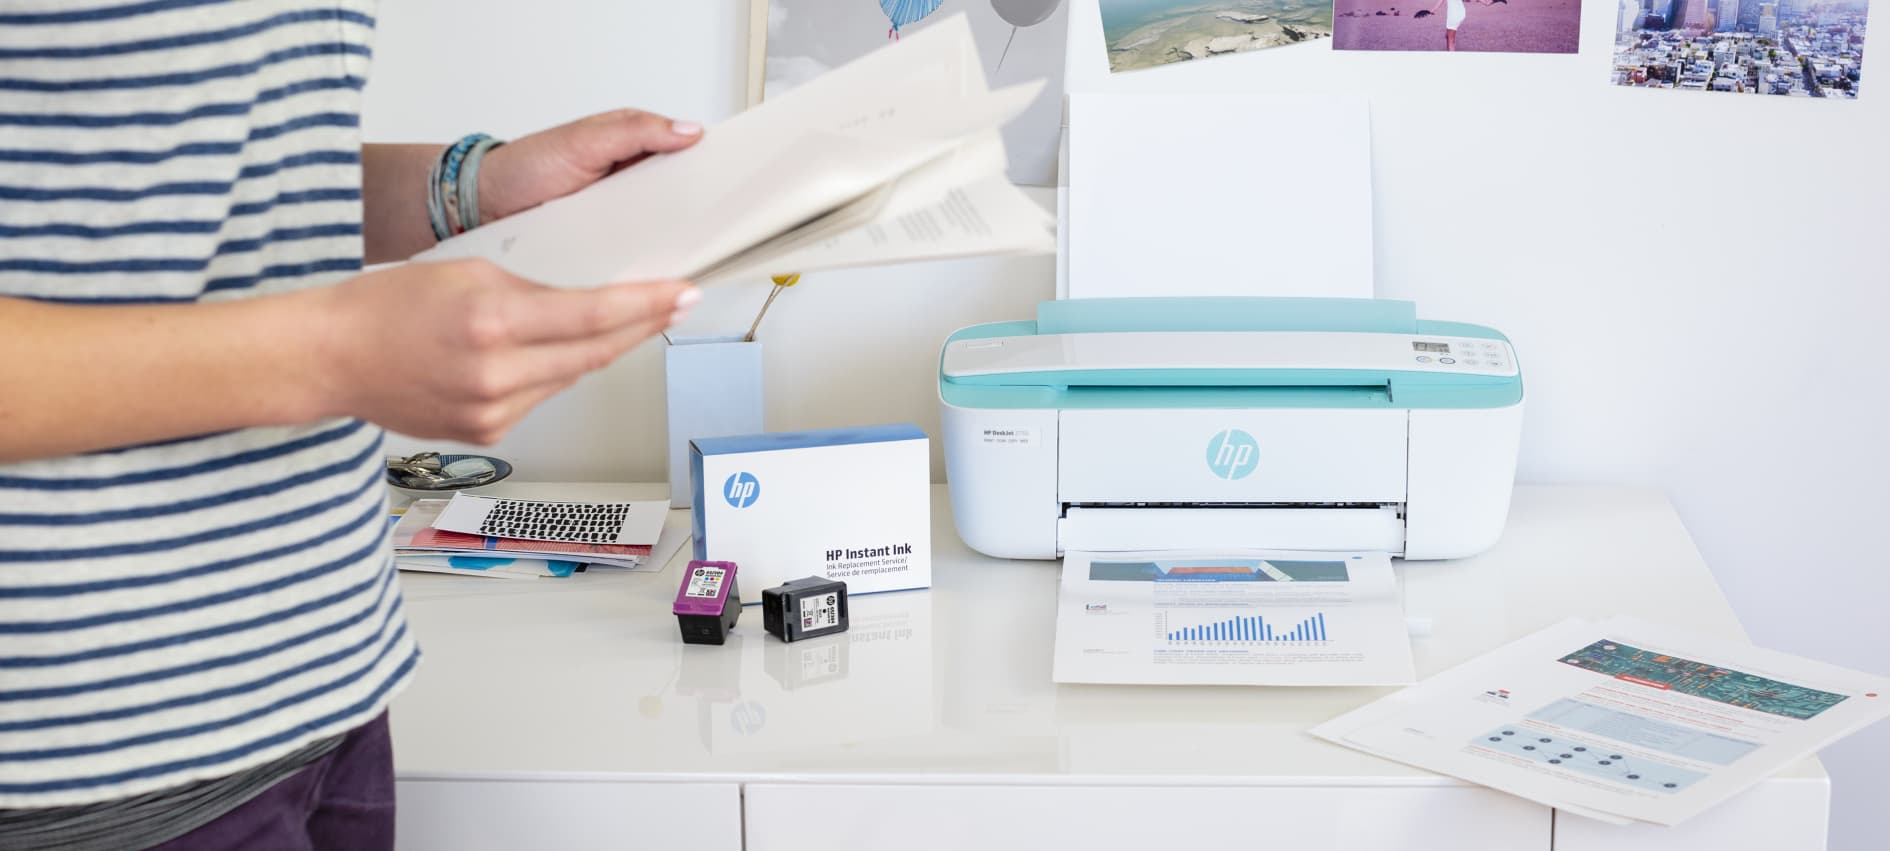 5 Best HP Printers to Give as Gifts